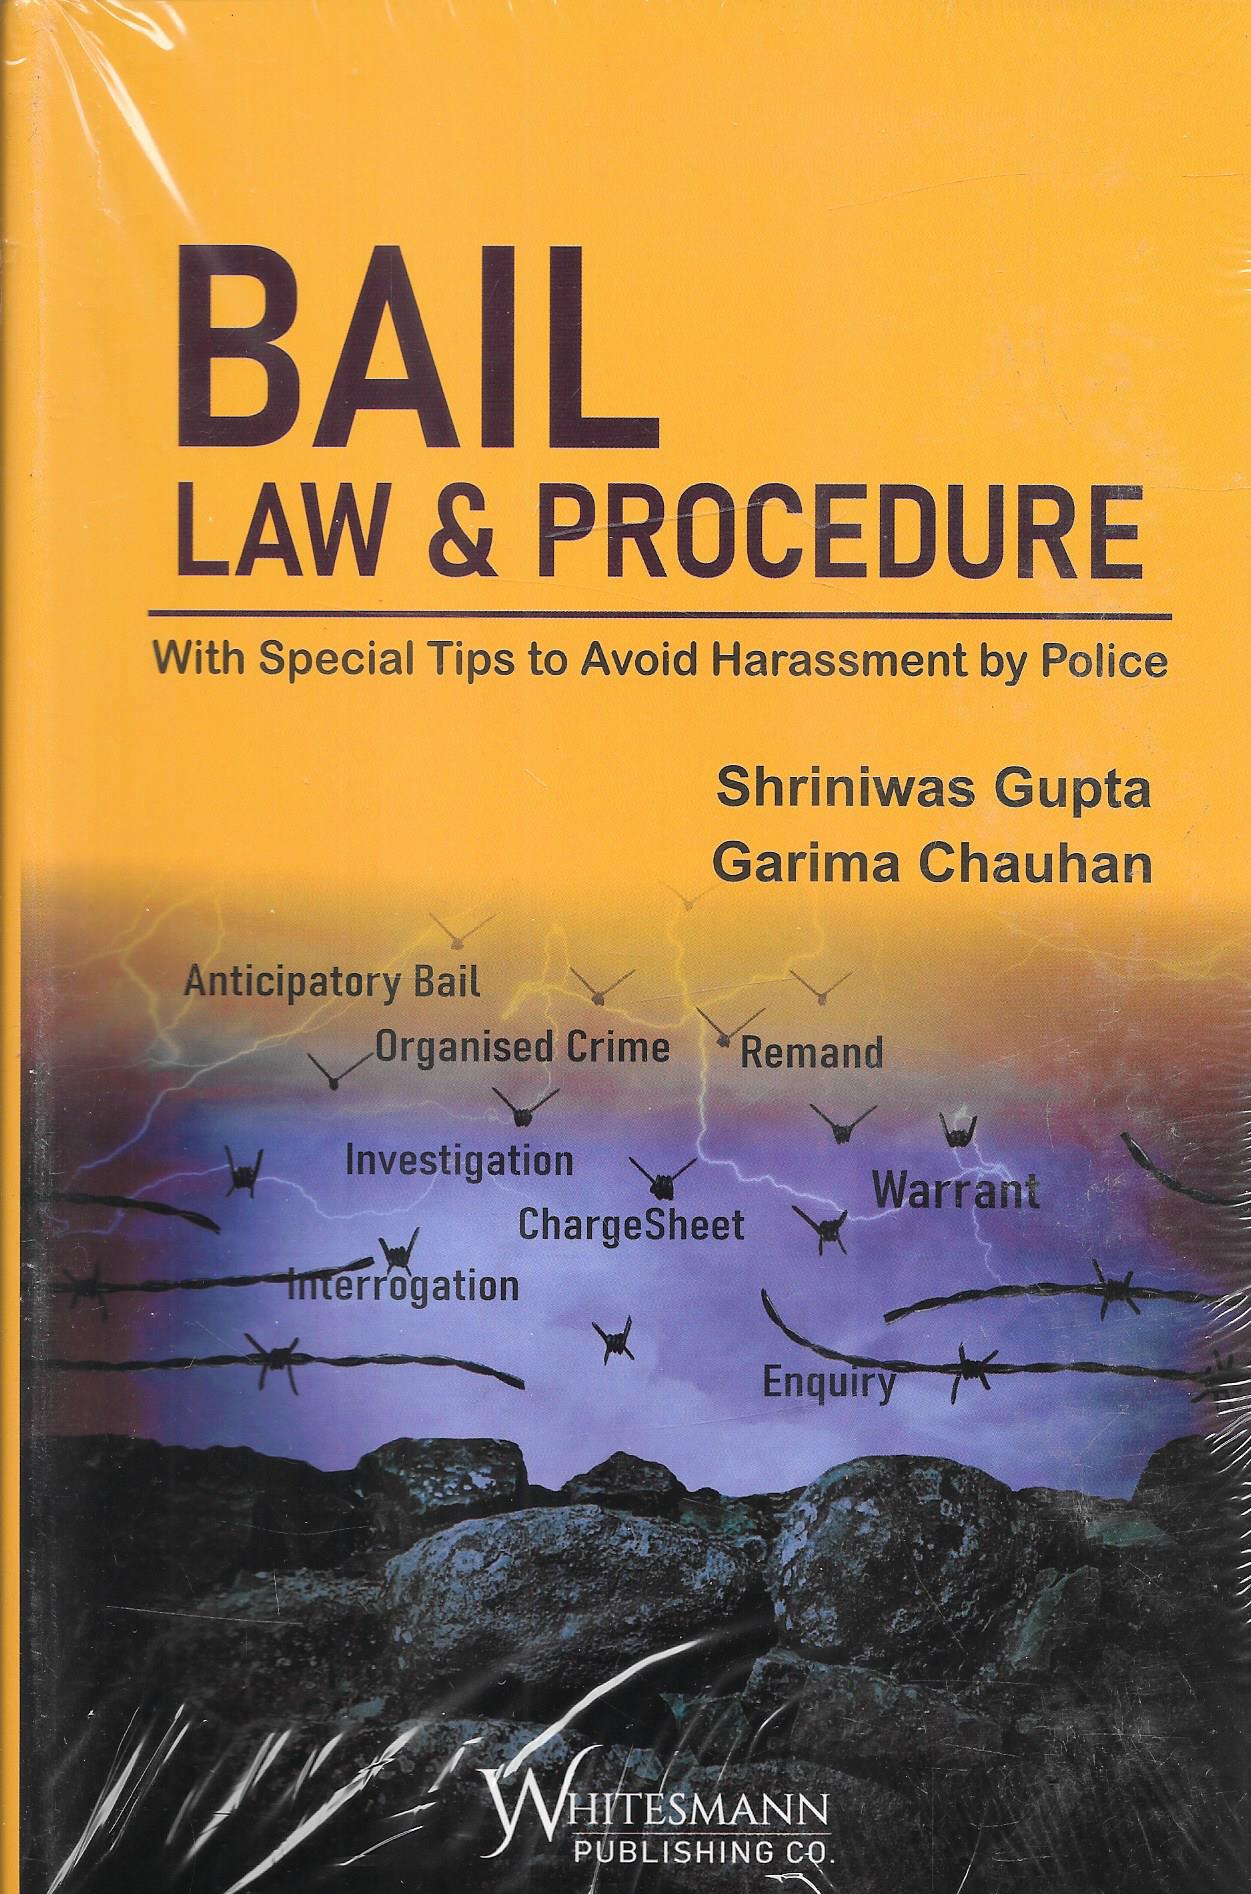 Bail Law & Procedure With Special Tips To Avoid Harassment By Police